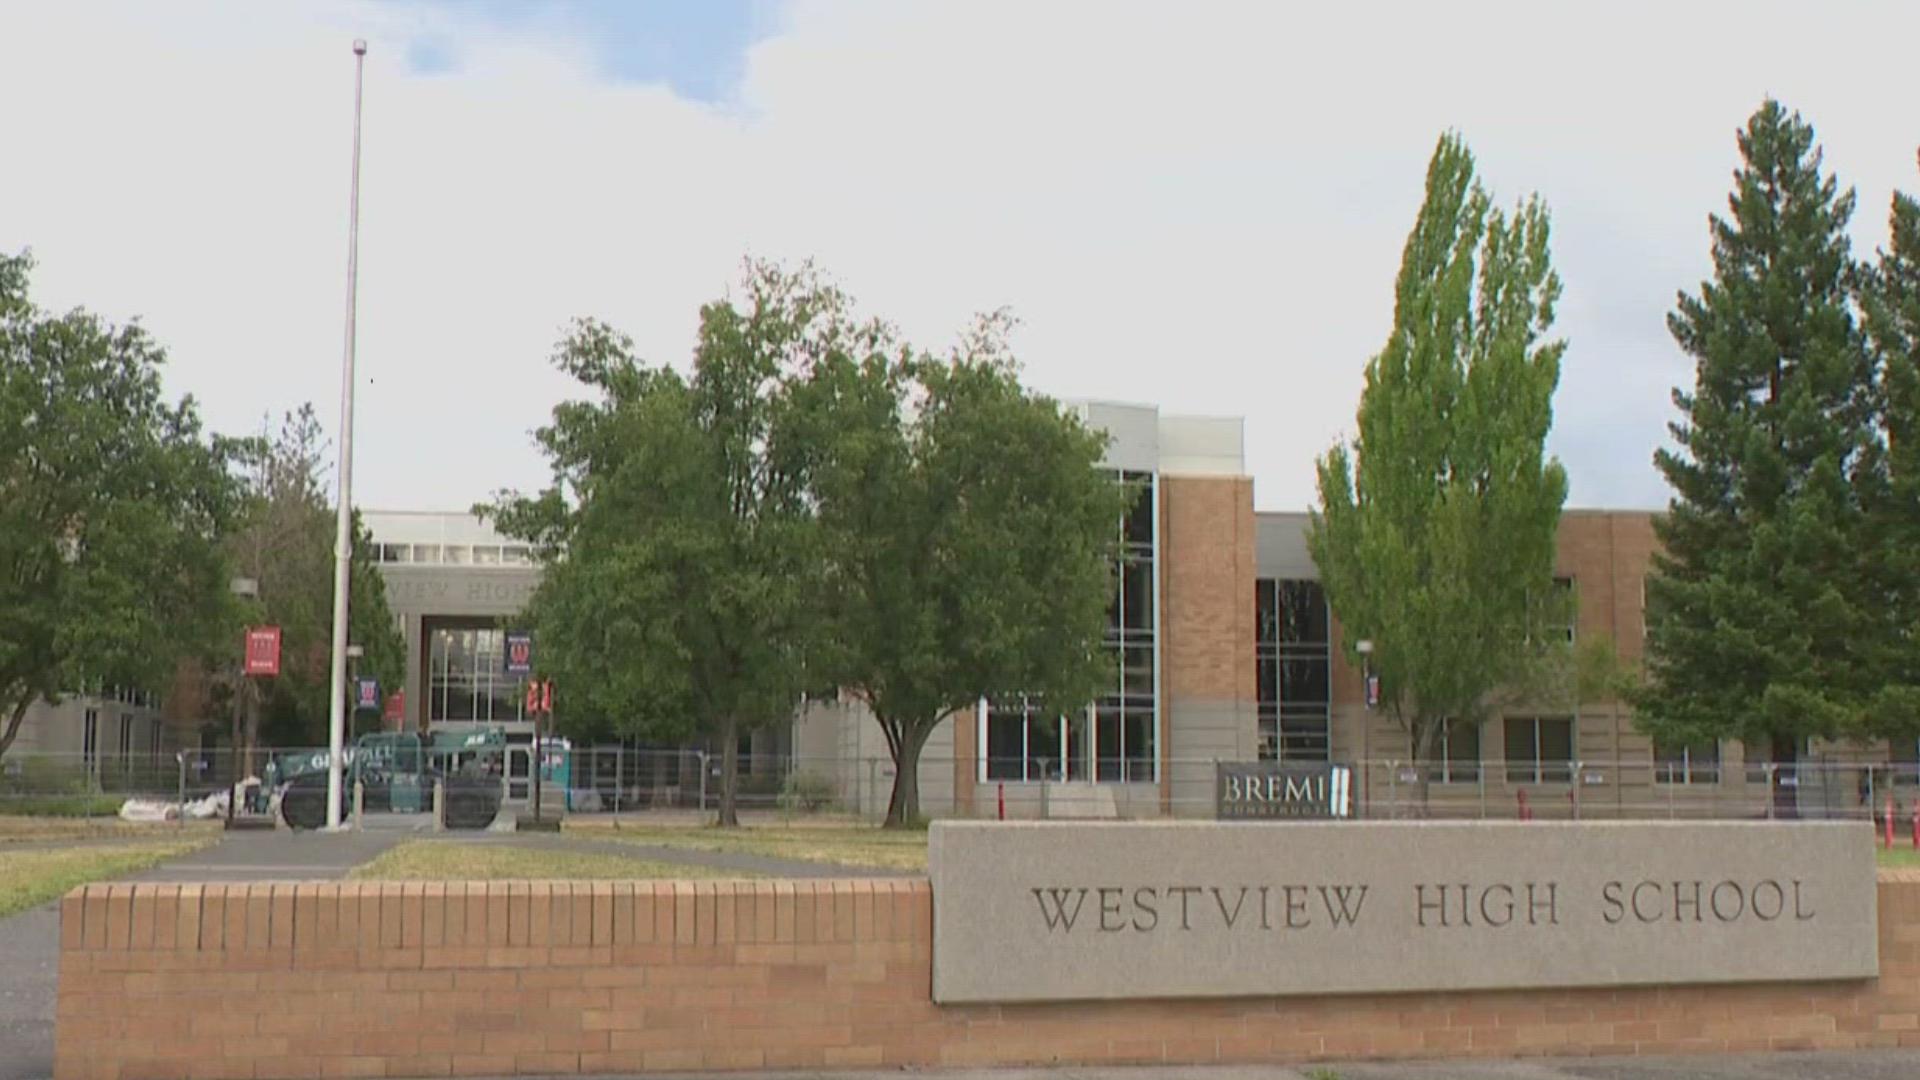 Westview High School's former head football coach was arrested on 12 counts of harassment for allegedly waking up students by slapping and shaking them.